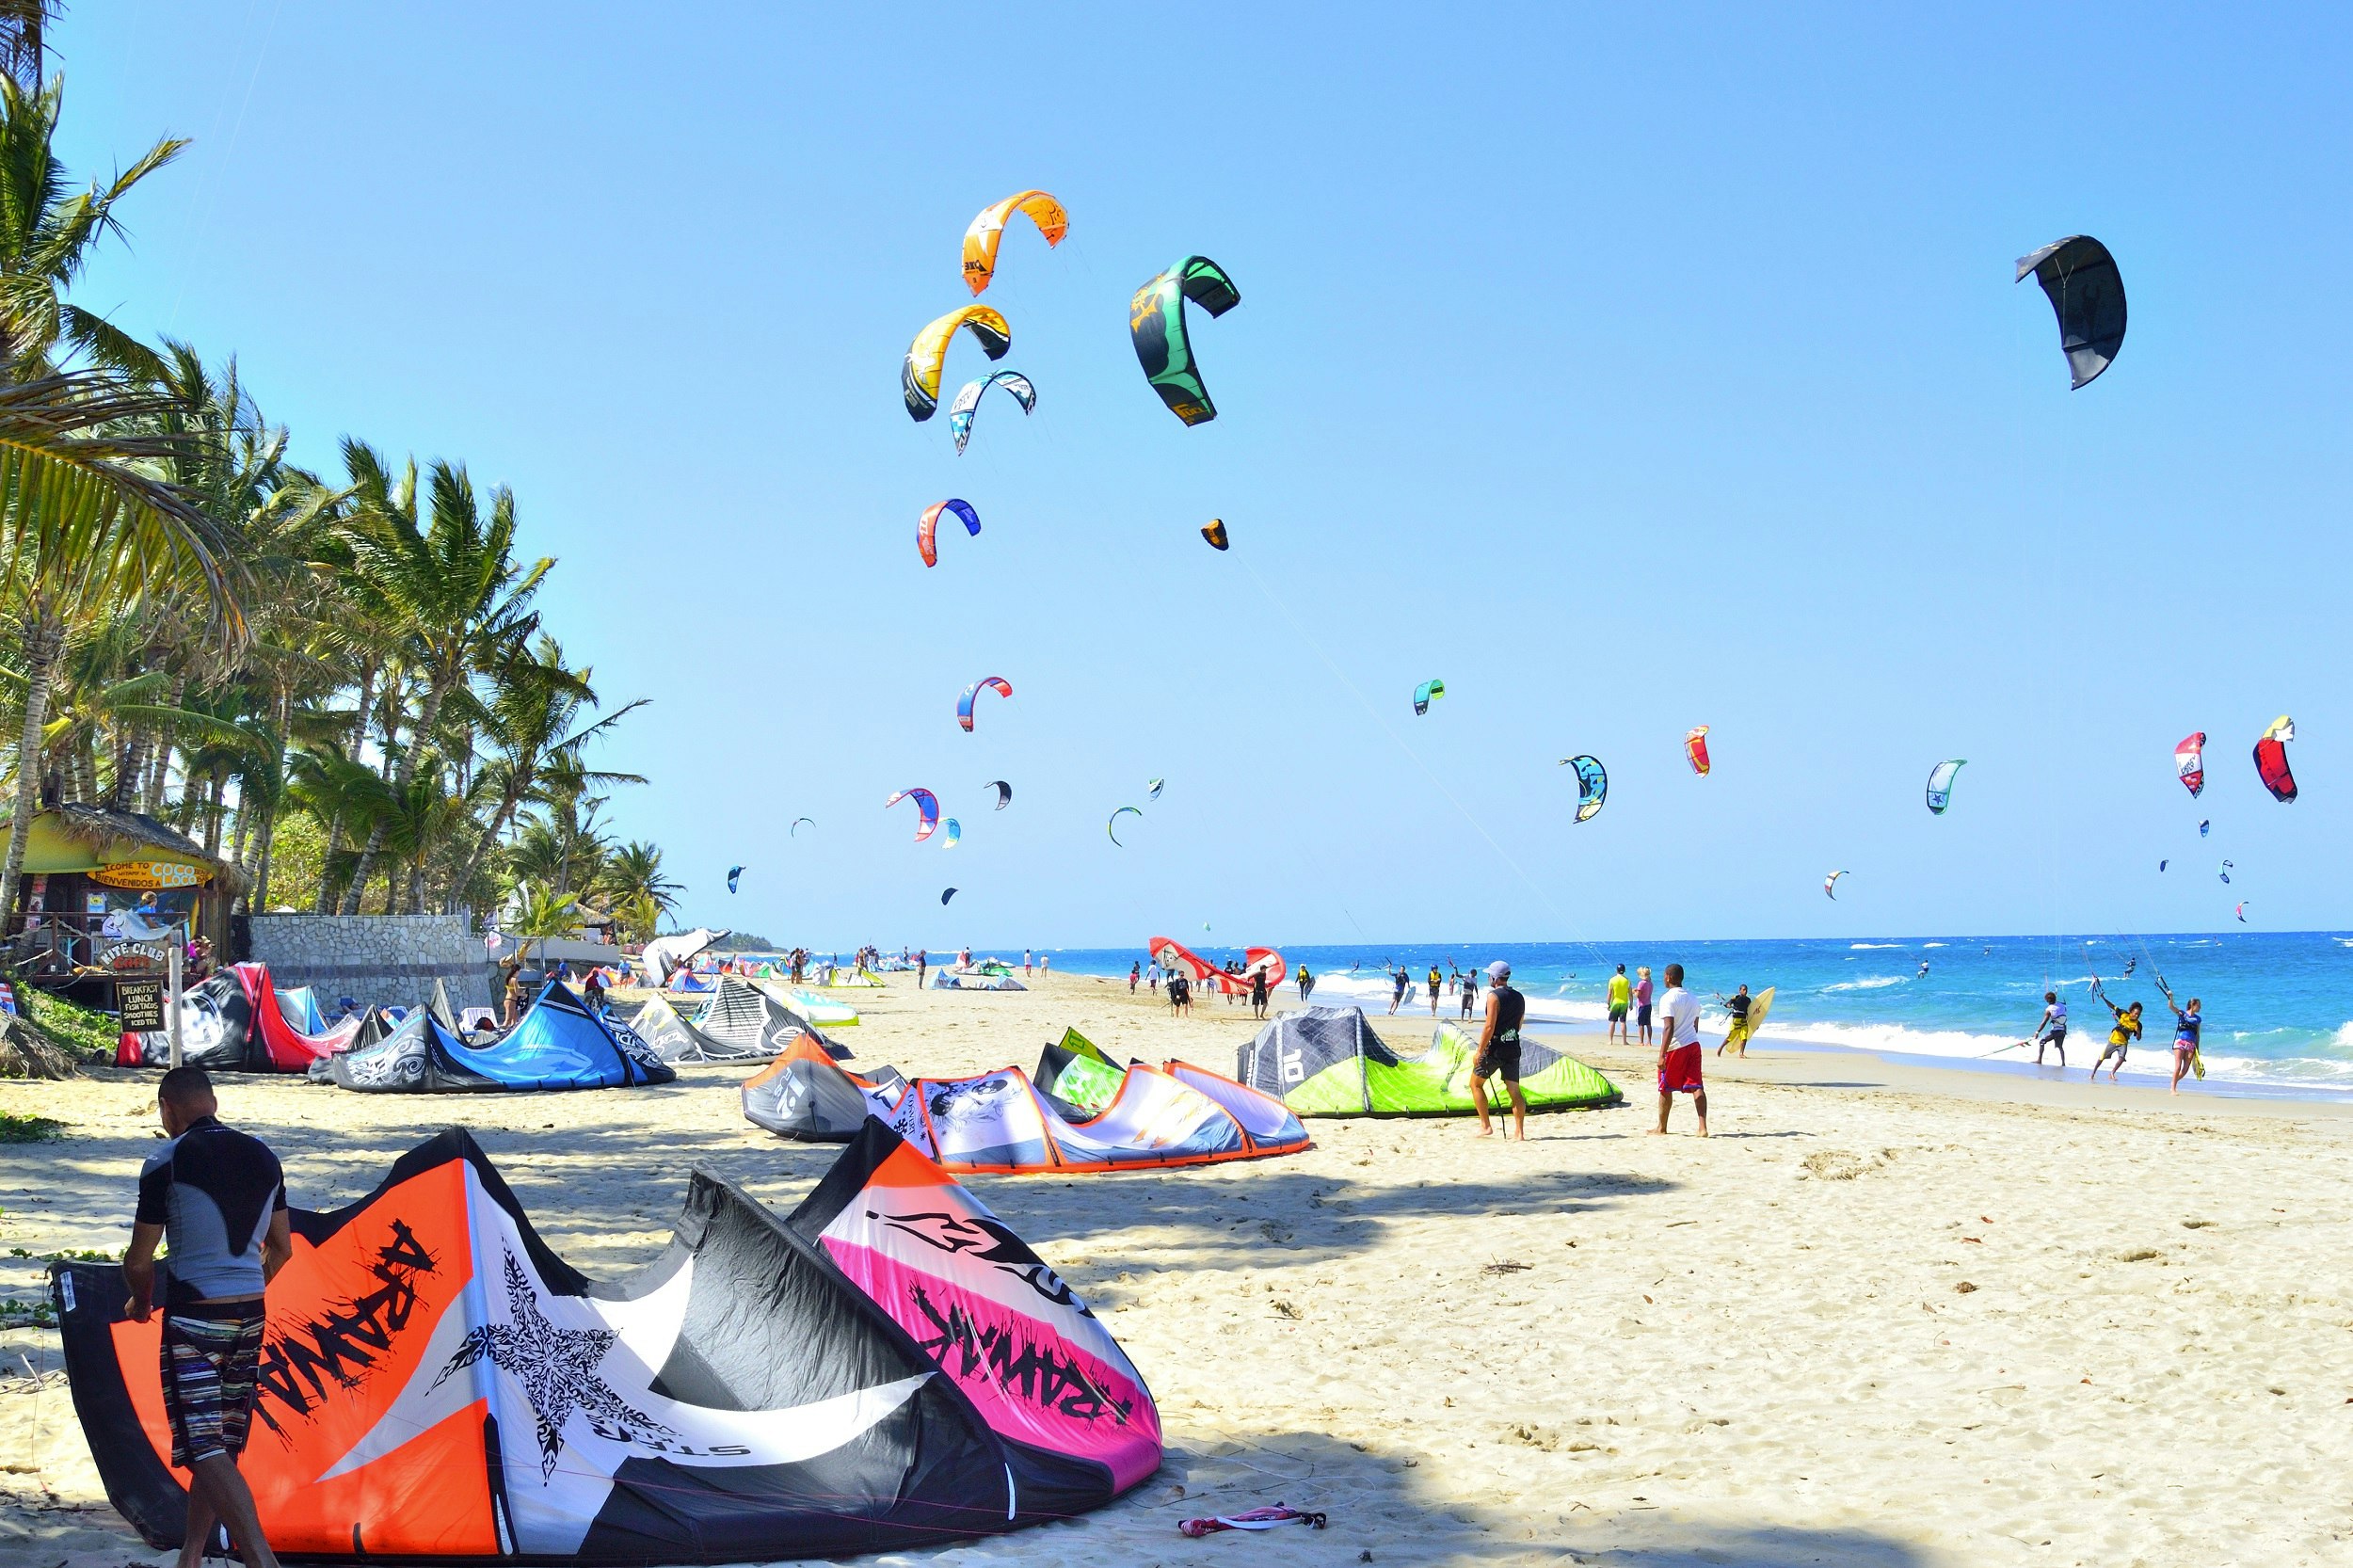 A palm-fringed beach is dotted with kitesurfers preparing their kites on the beach, while many others have already got them airborne.